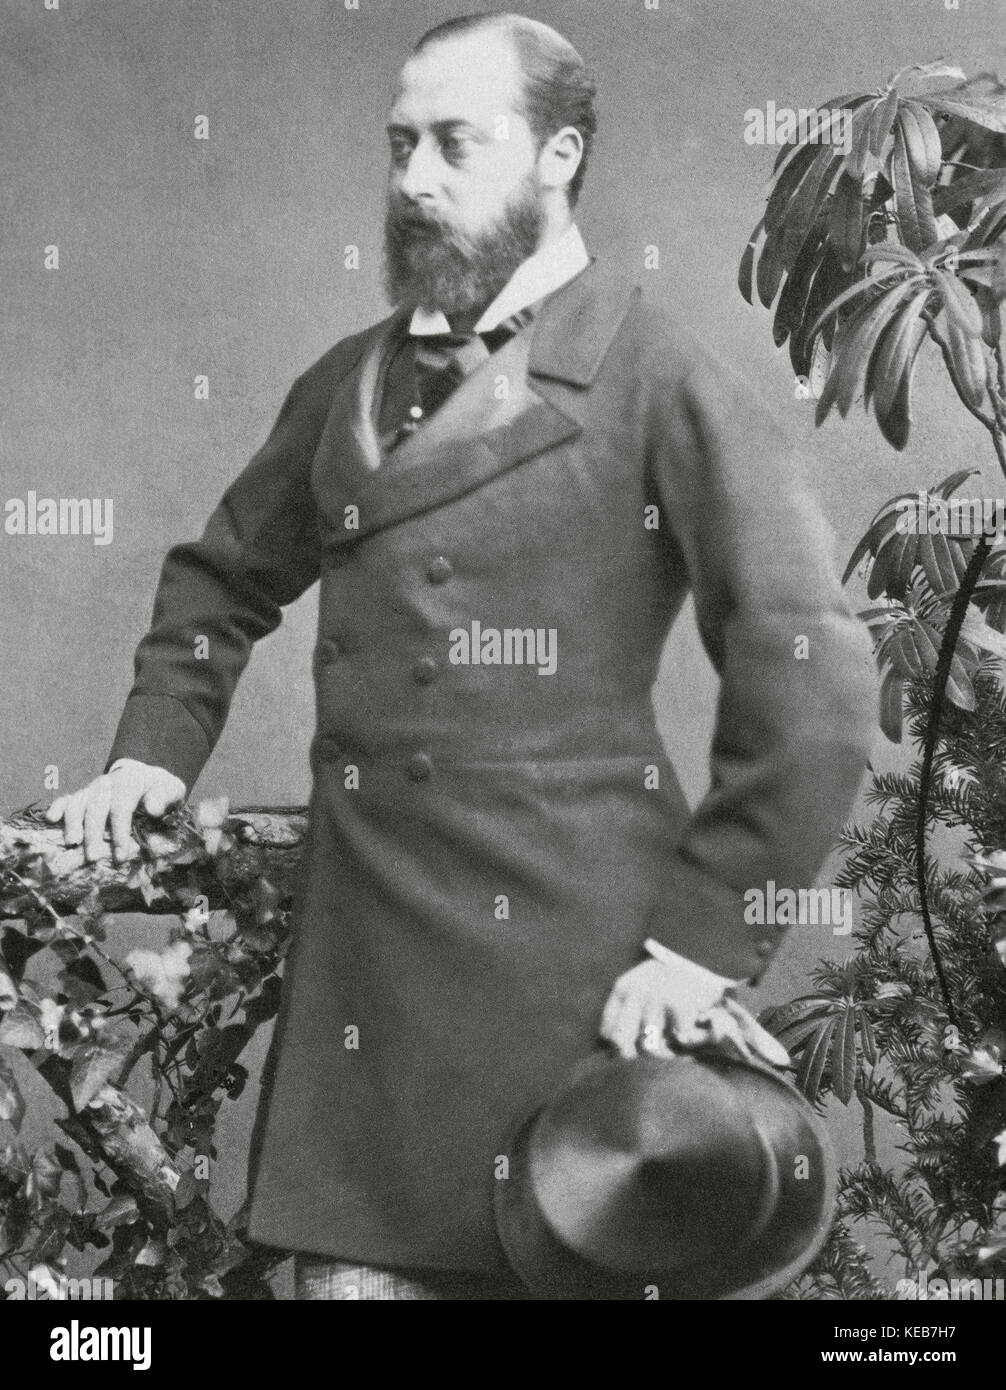 Edward VII (1841-1910). King of the United Kingdom and the British Dominions and Emperor of India from 1901 until his death in 1910. Portrait. Photography. Stock Photo